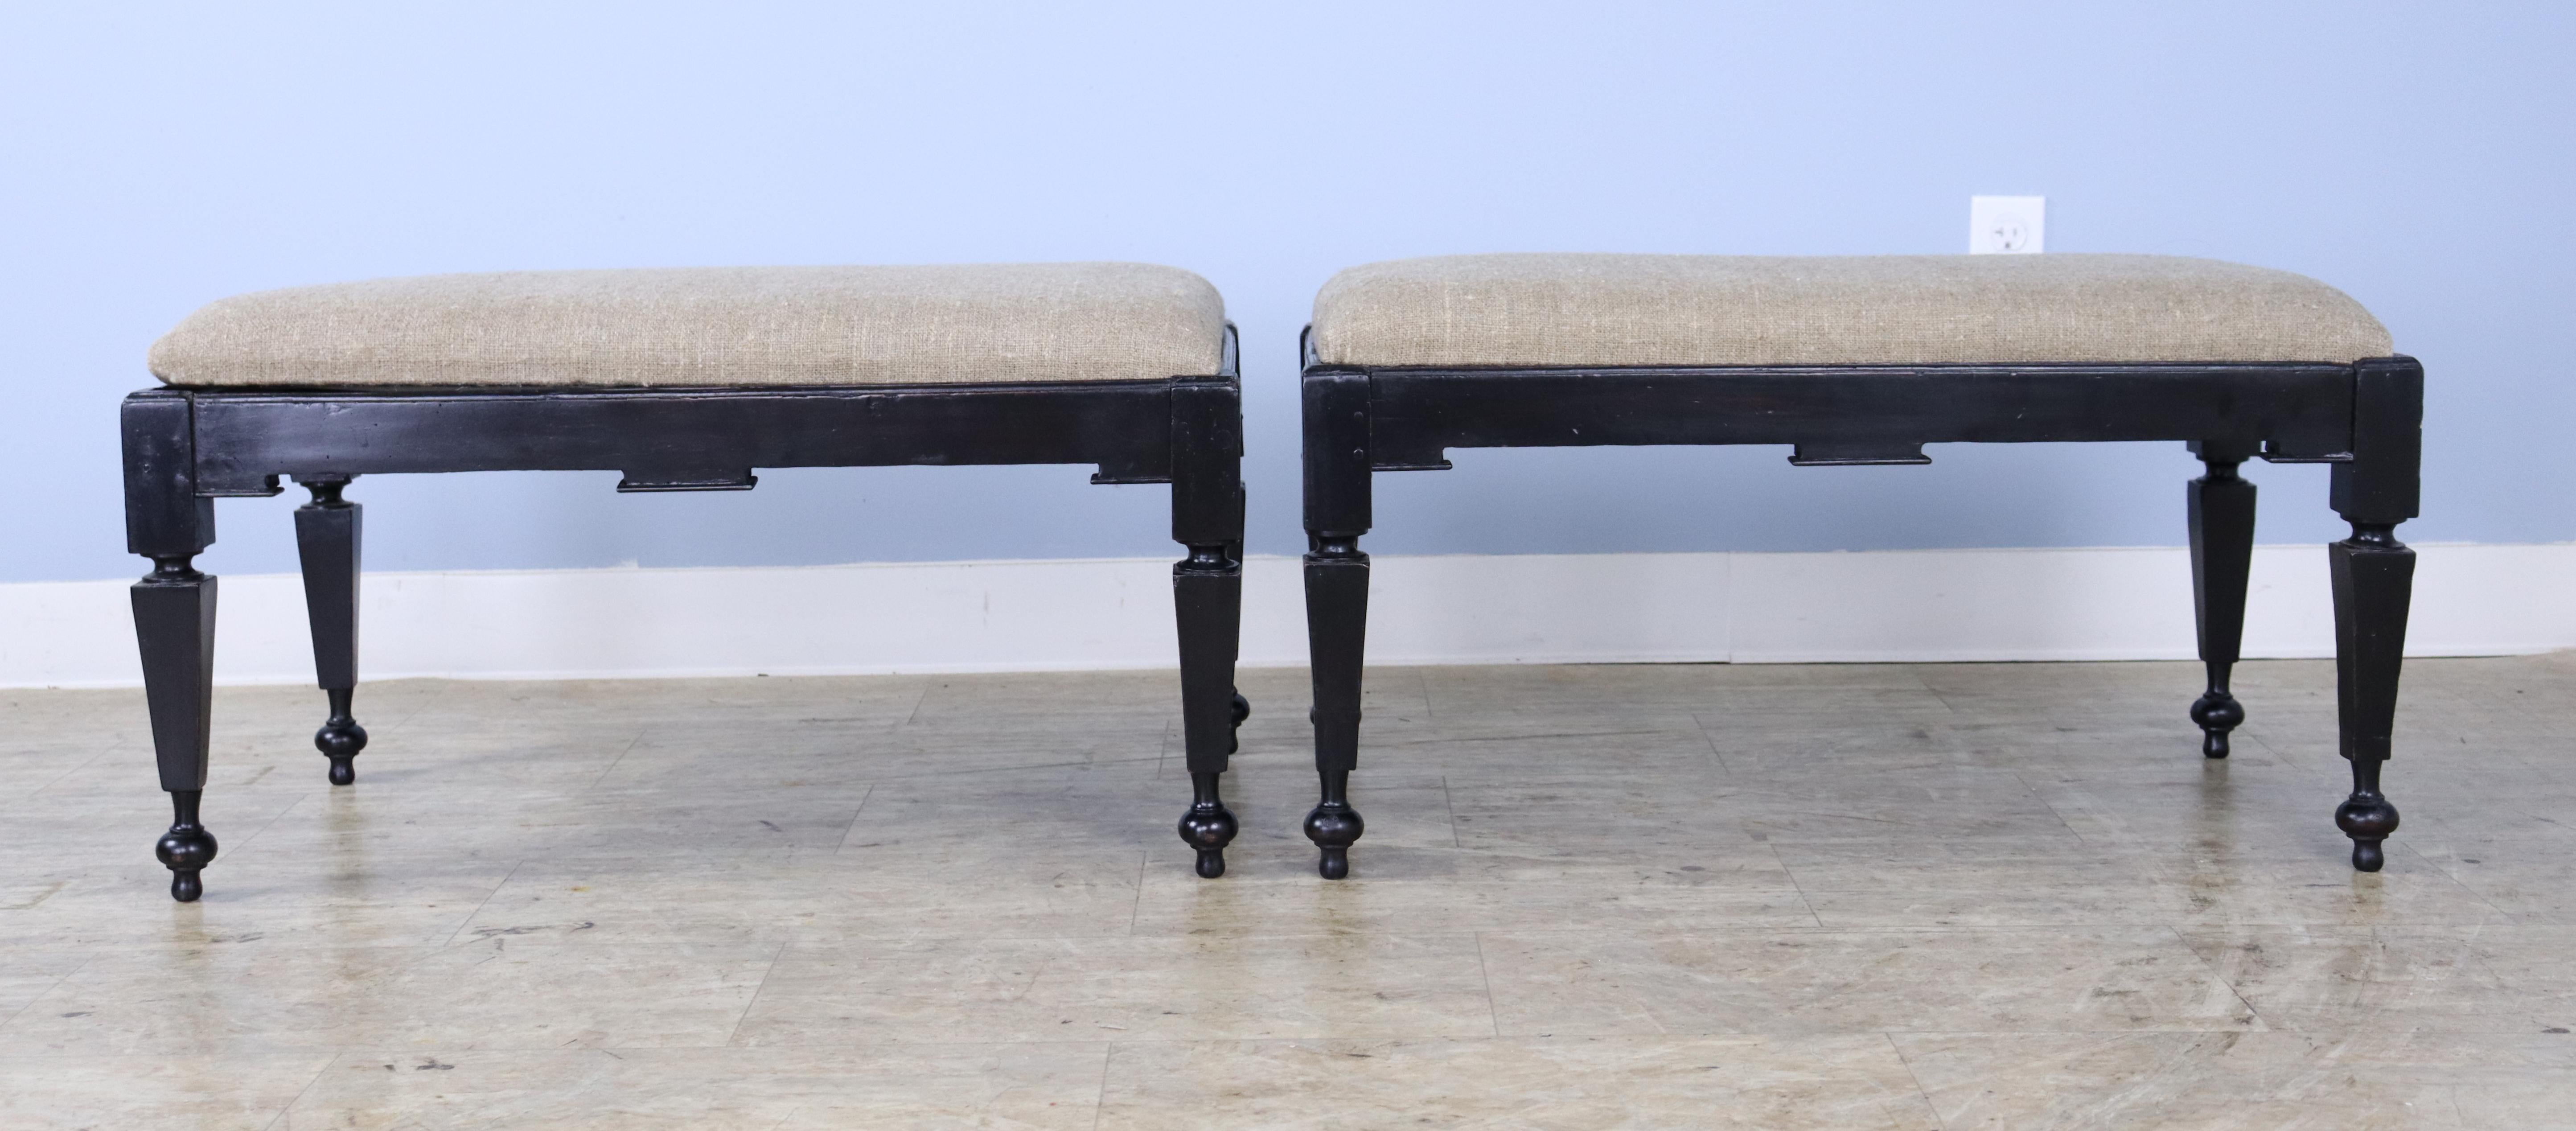 A pair of 18th Century or early 19th Century Italian stools, recently painted black and slightly distressed.  The removable seats have been upholstered in a slightly fuzzy light brown woven material.  